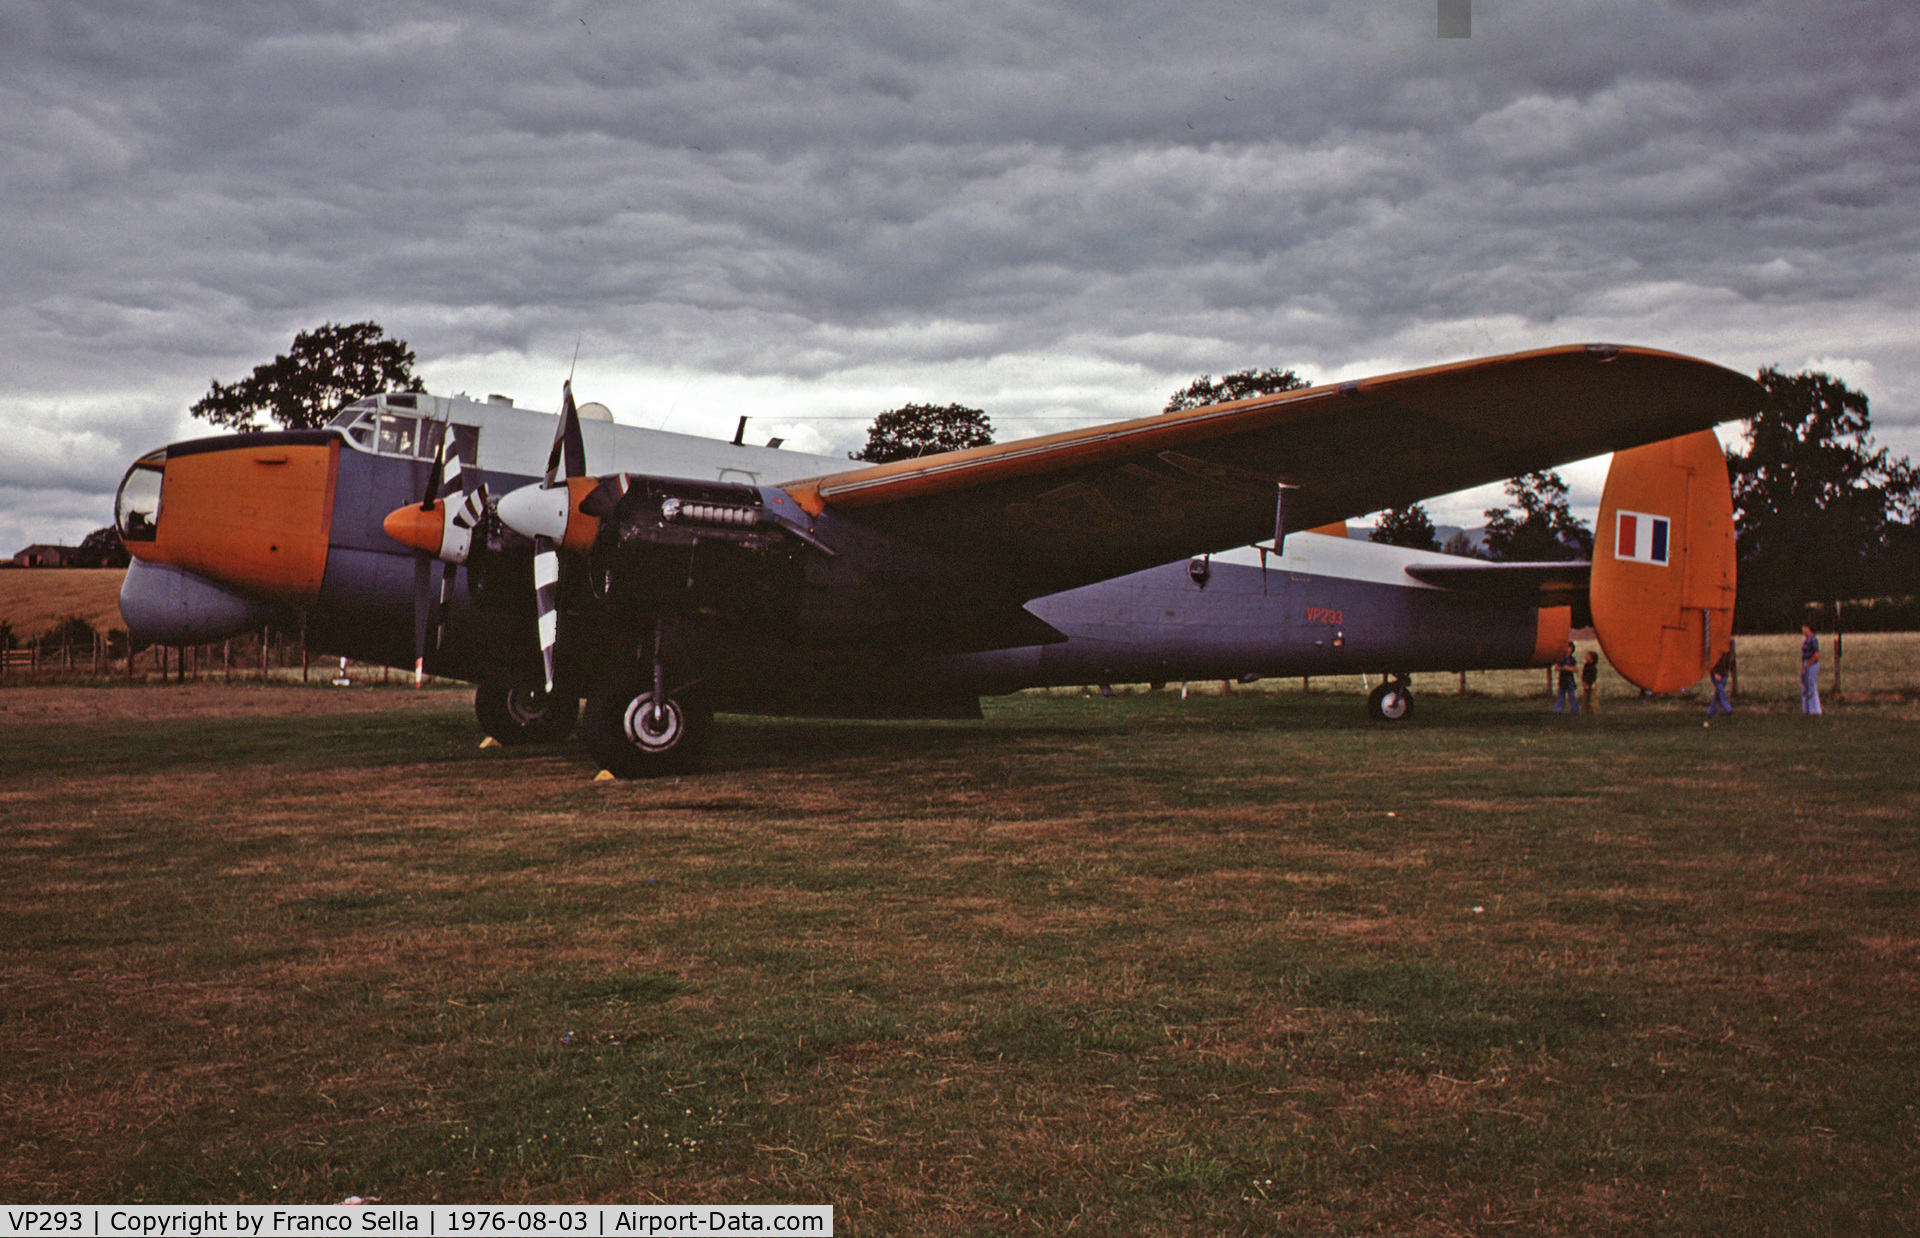 VP293, Avro 716 Shackleton T.4 C/N Not found VP293, Avro Shackleton T.4 VP293 at the Strathallan Collection, August 1976.